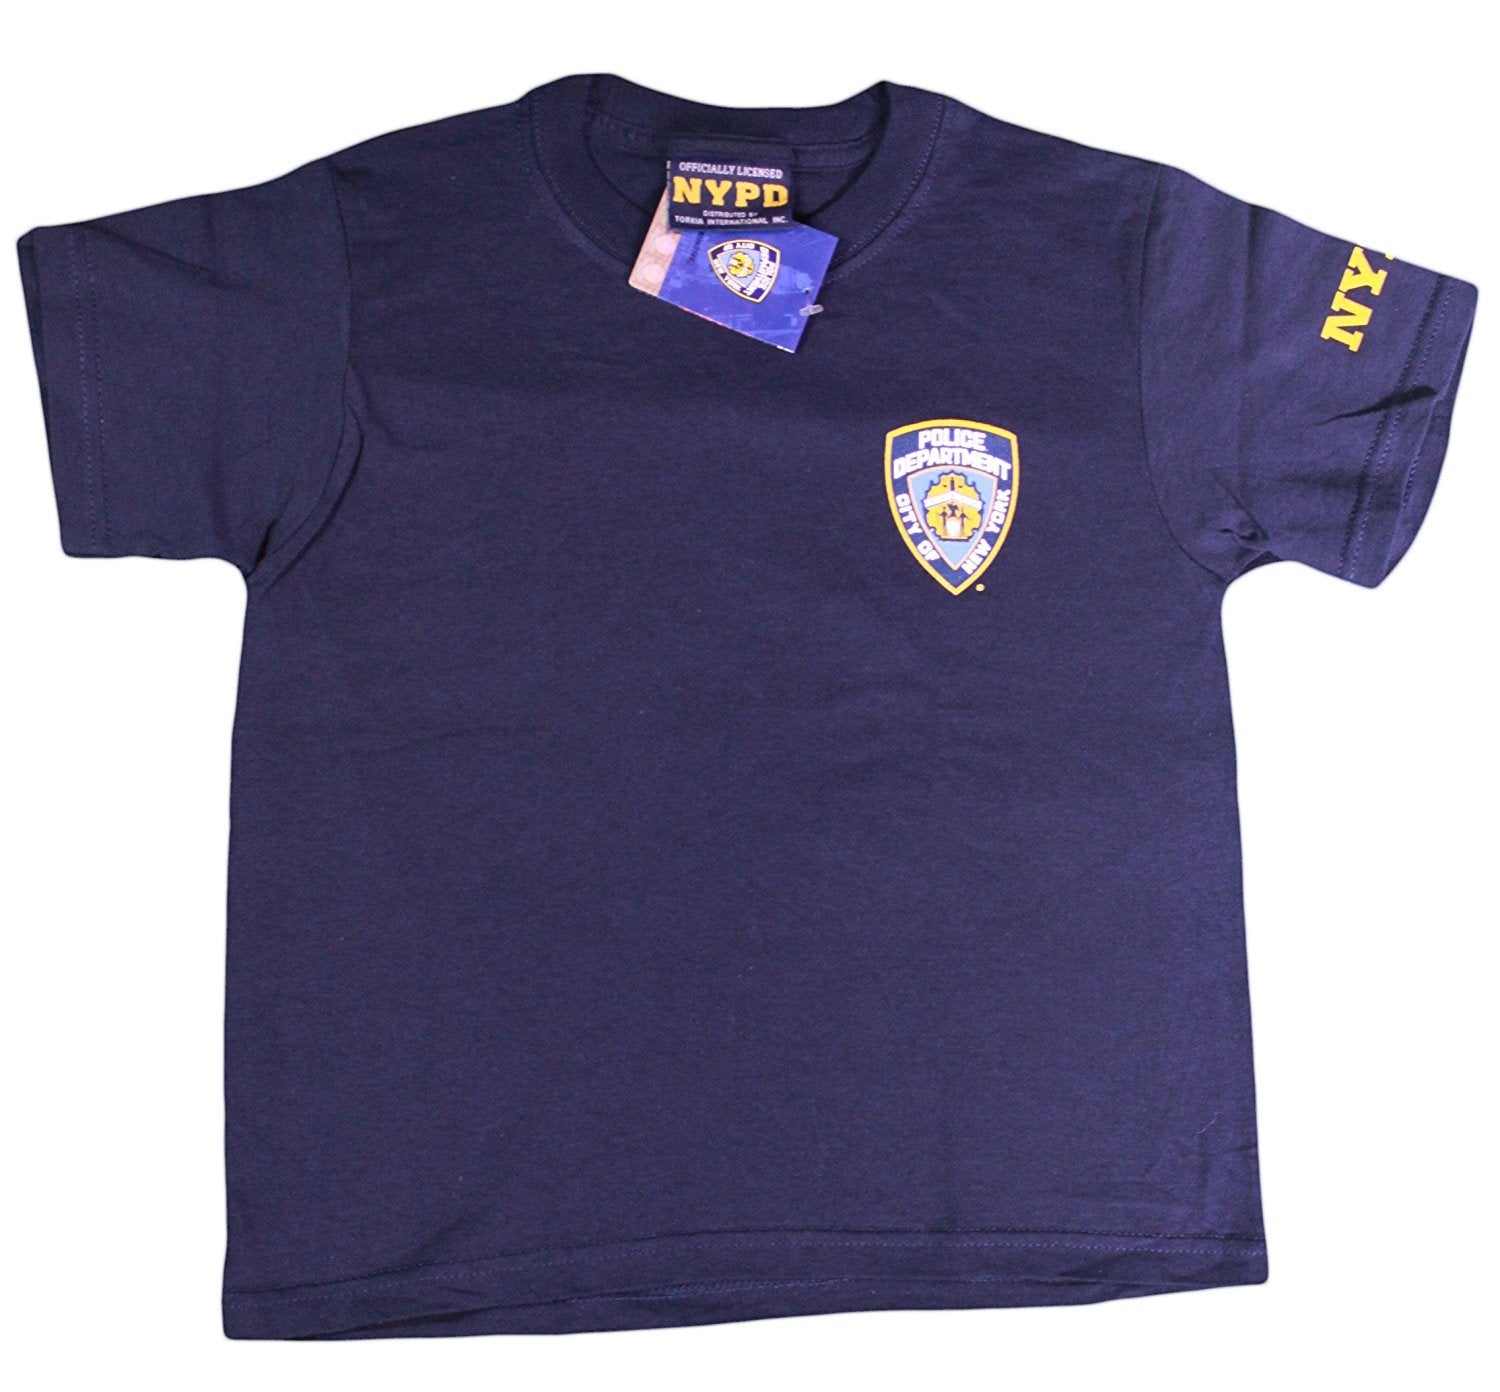 NYPD Kids T-shirt New York Finest Youth Navy Tee